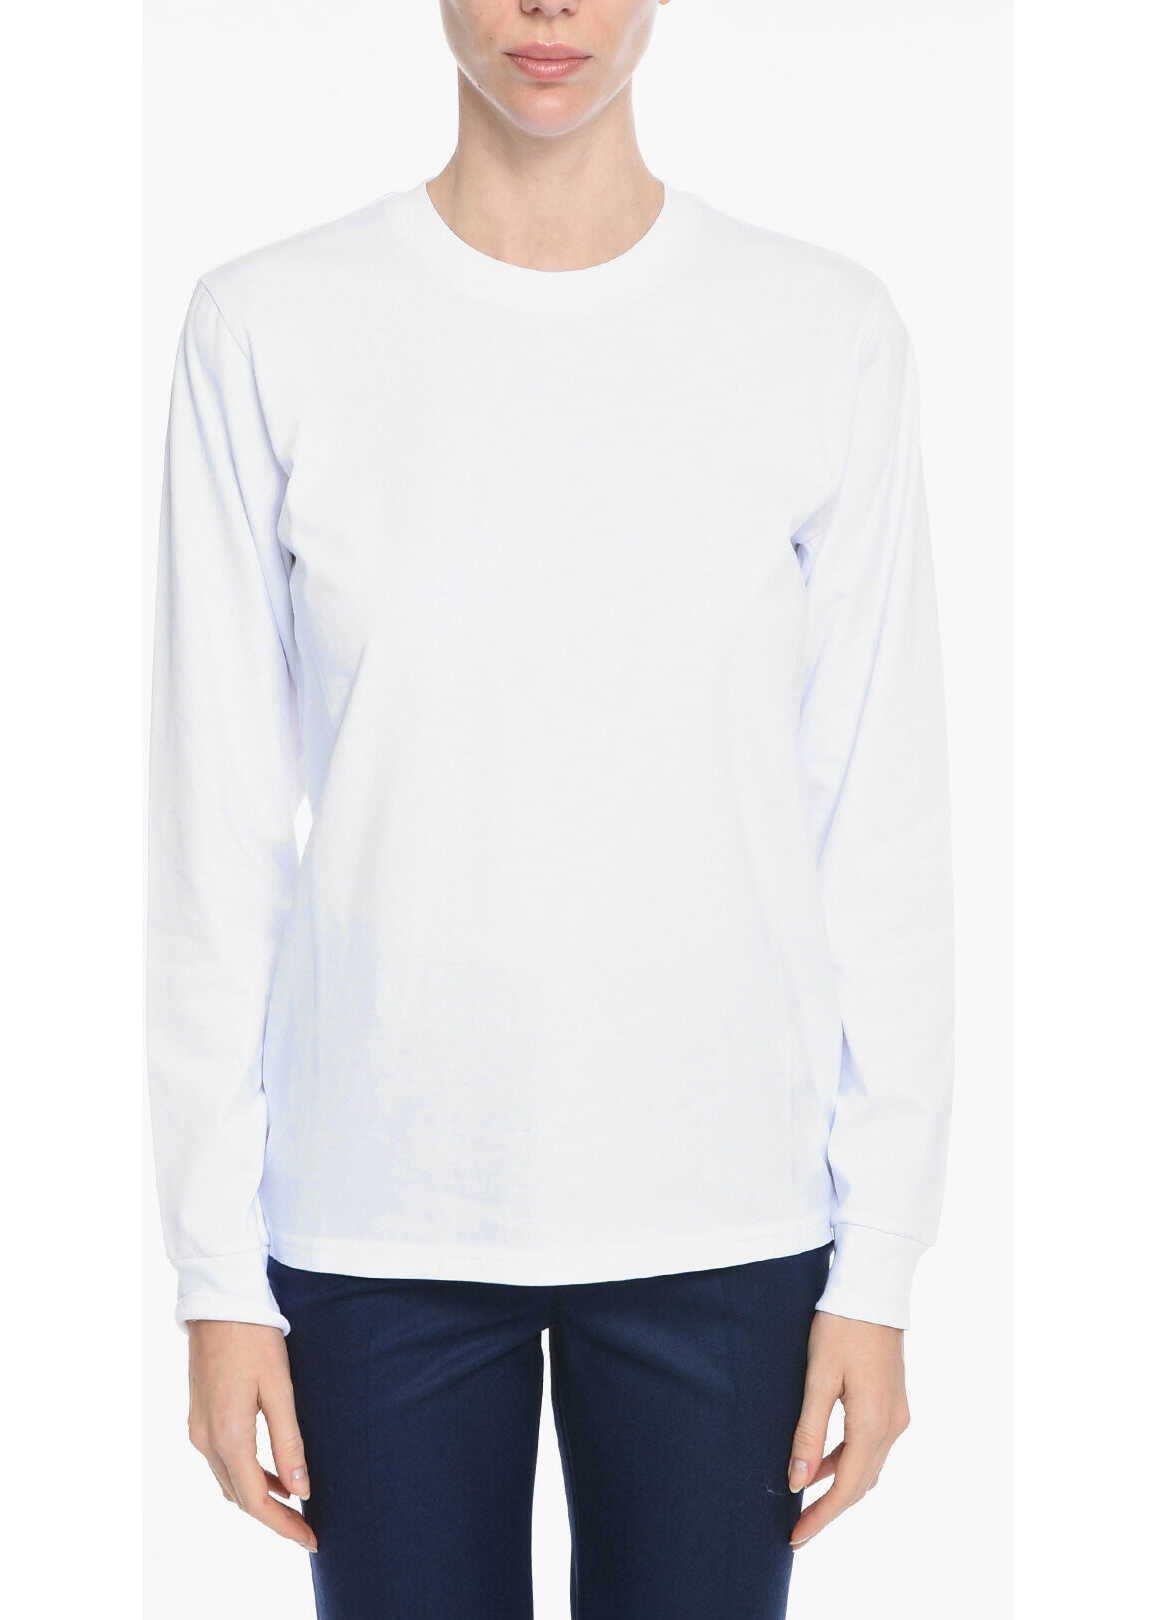 Department Five Long Sleeve Crew-Neck T-Shirt With Printed Logo White